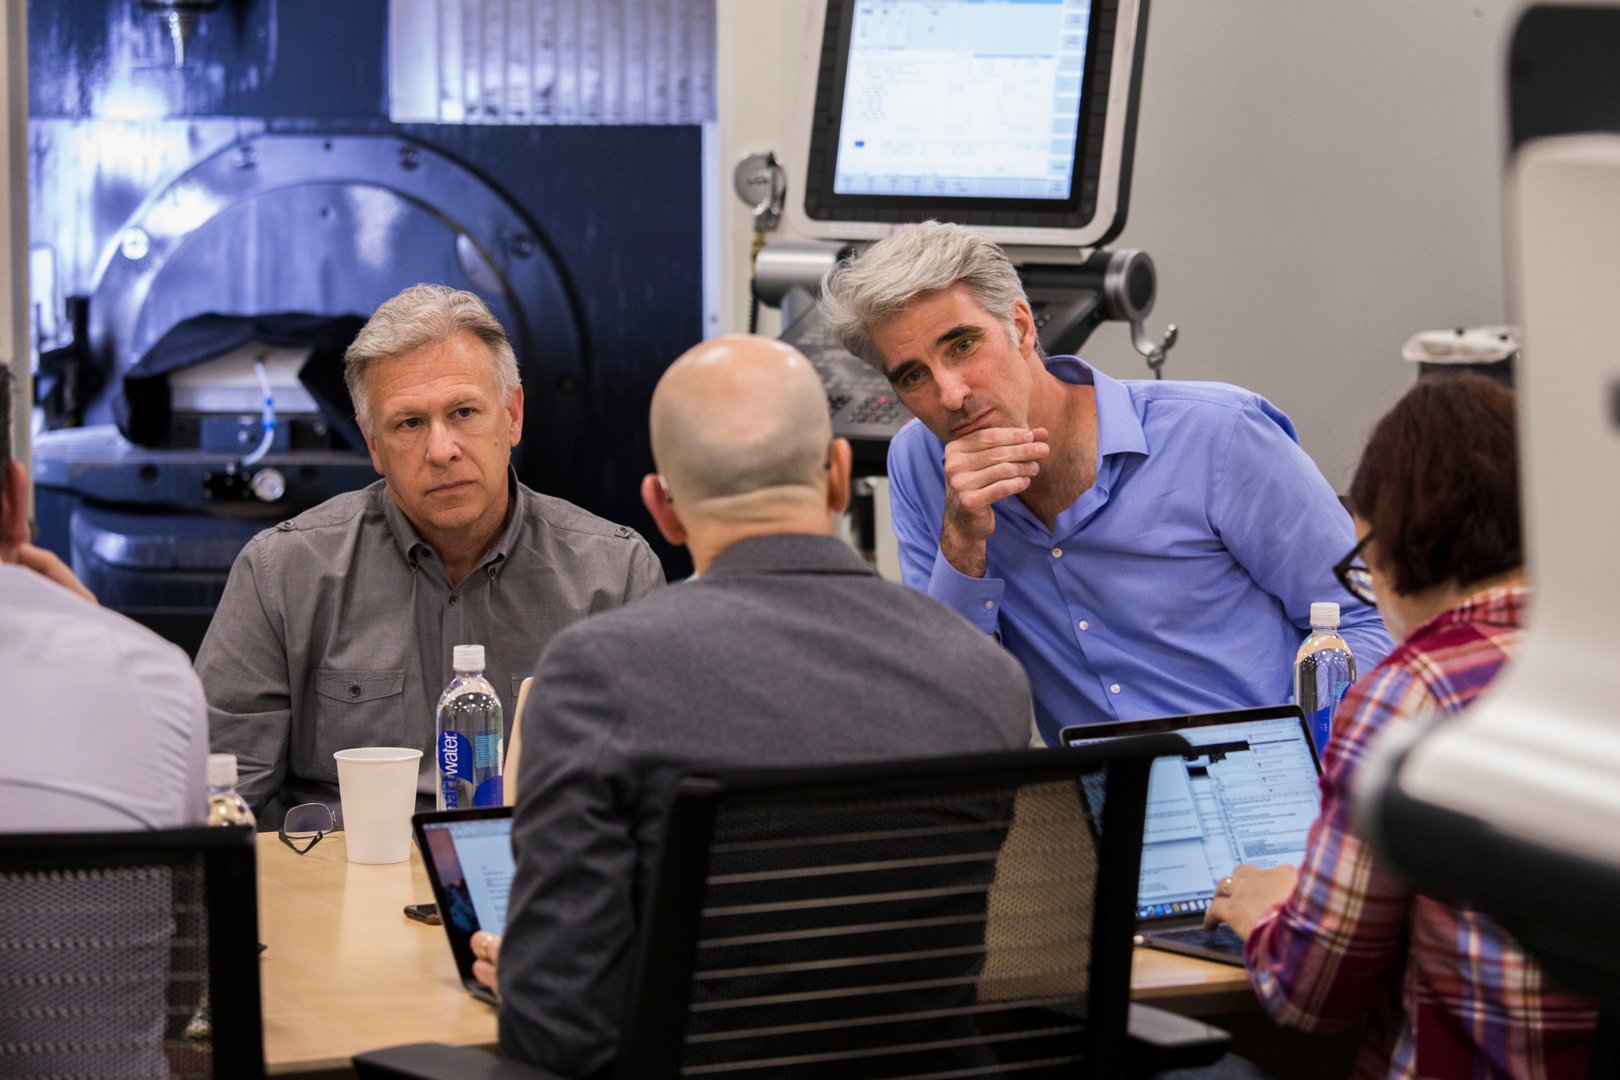 Former Apple global marketing manager Phil Schiller (left) and Apple's senior vice president of software development Craig Federighi (right) chat with Lance Ulanoff (foreground) about the Mac Pro.